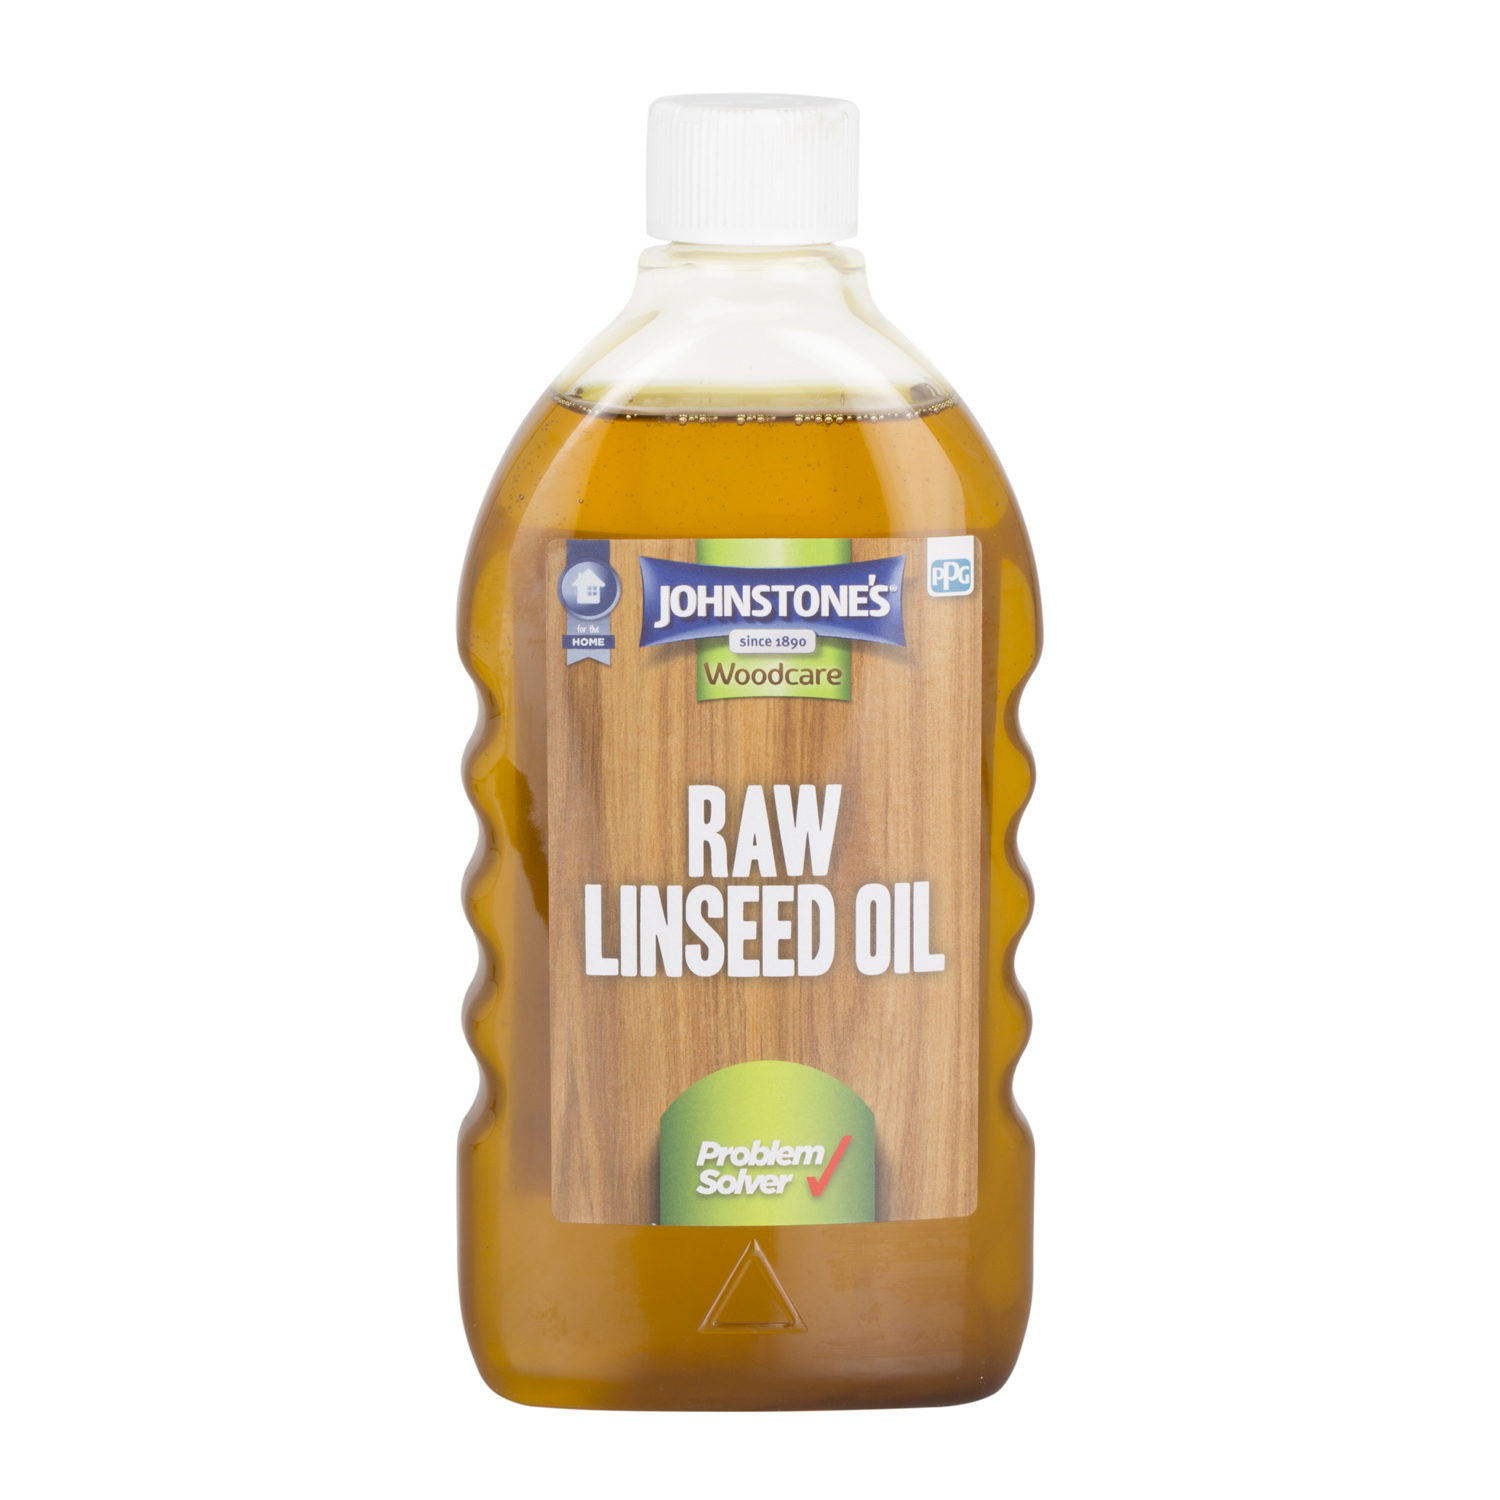 Johnstone's Woodcare Raw Linseed Oil 500ml Image